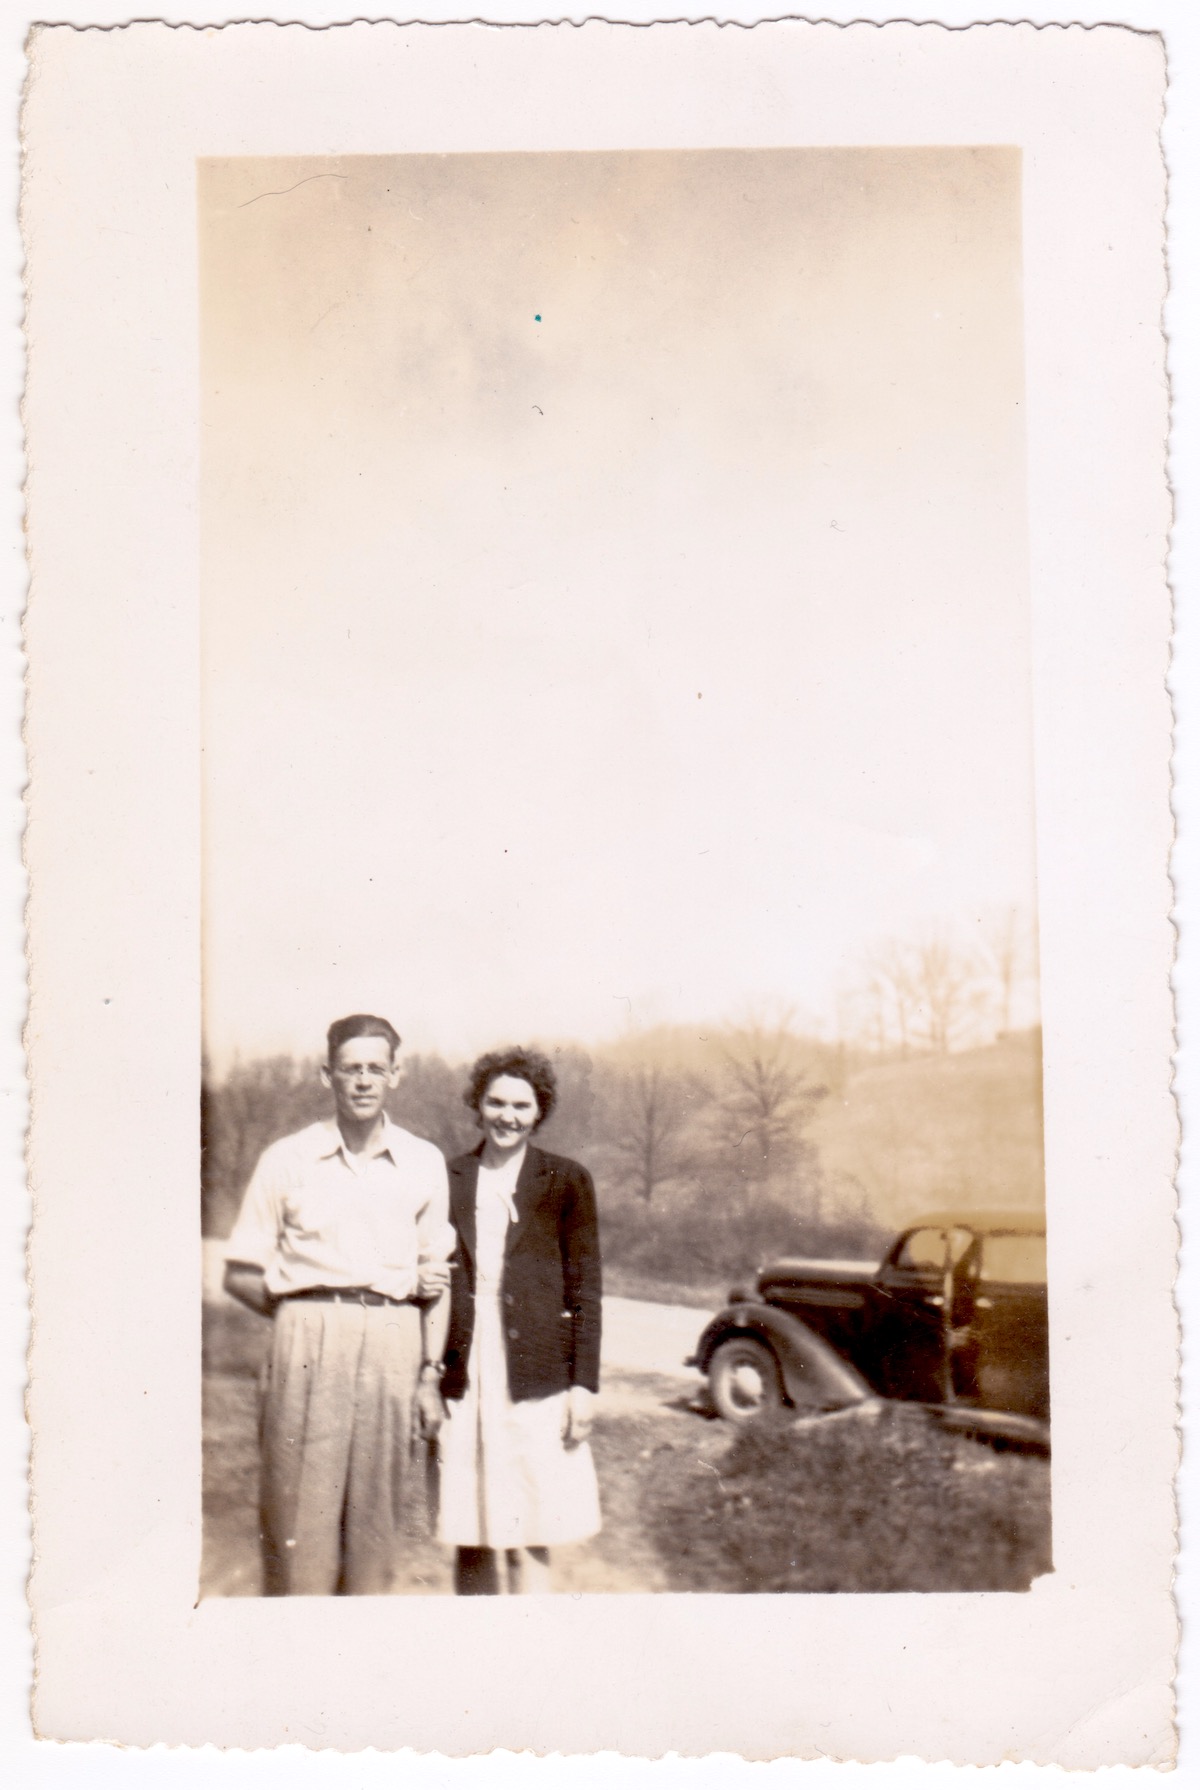 K.C. Potter’s father and mother, Paul Potter and Amanda Mollette Potter, Fallsburg, KY, early 1940s.